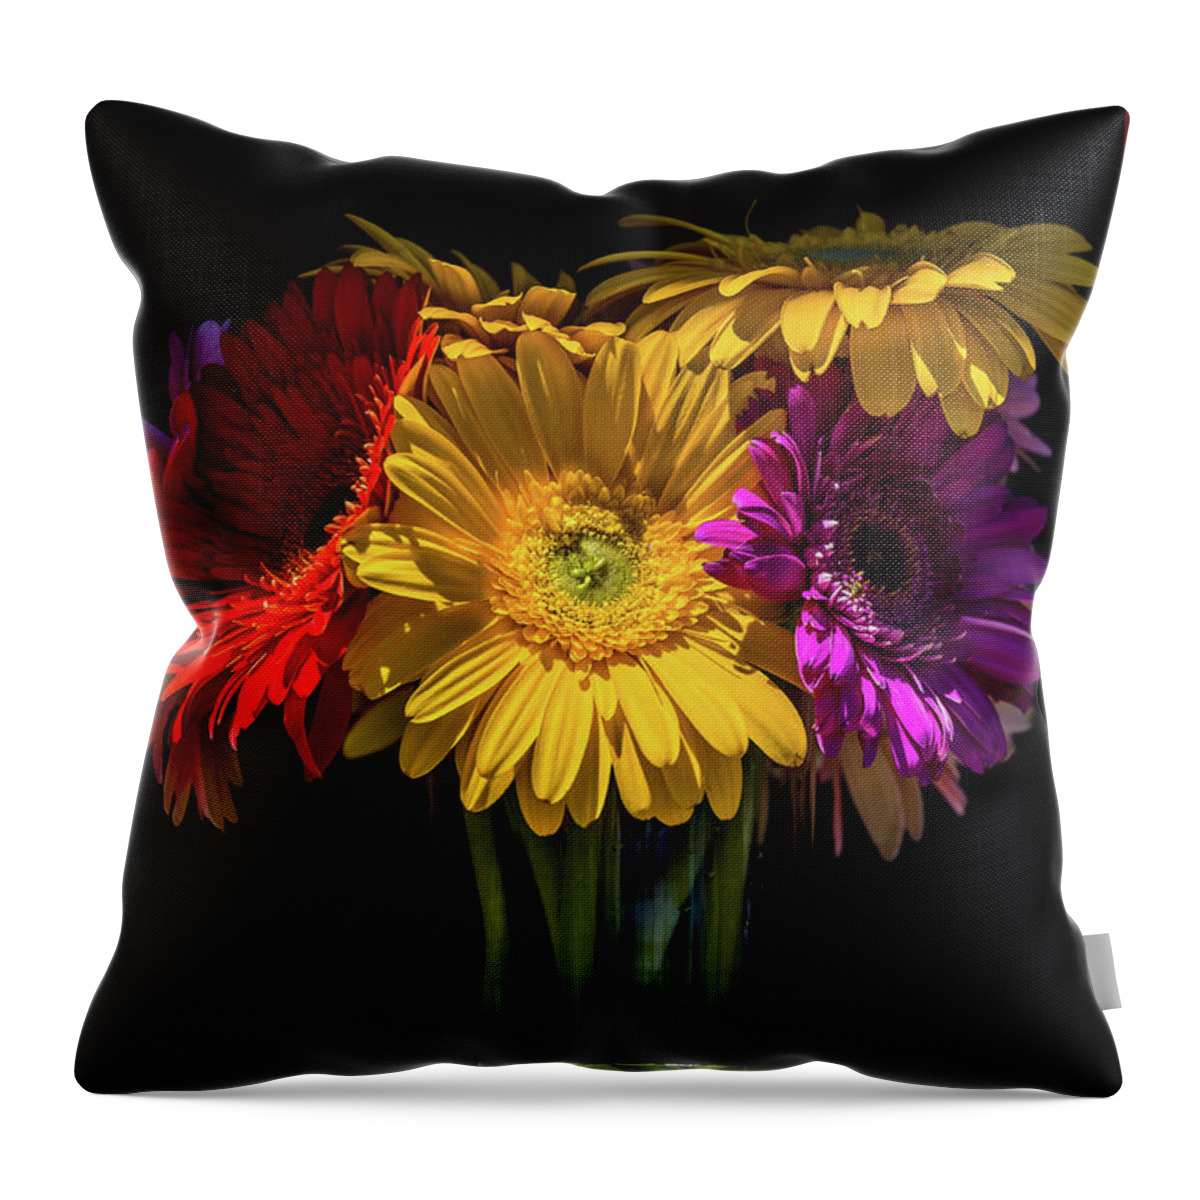 Flowers Throw Pillow featuring the photograph A Beautiful Reunion by Penny Meyers